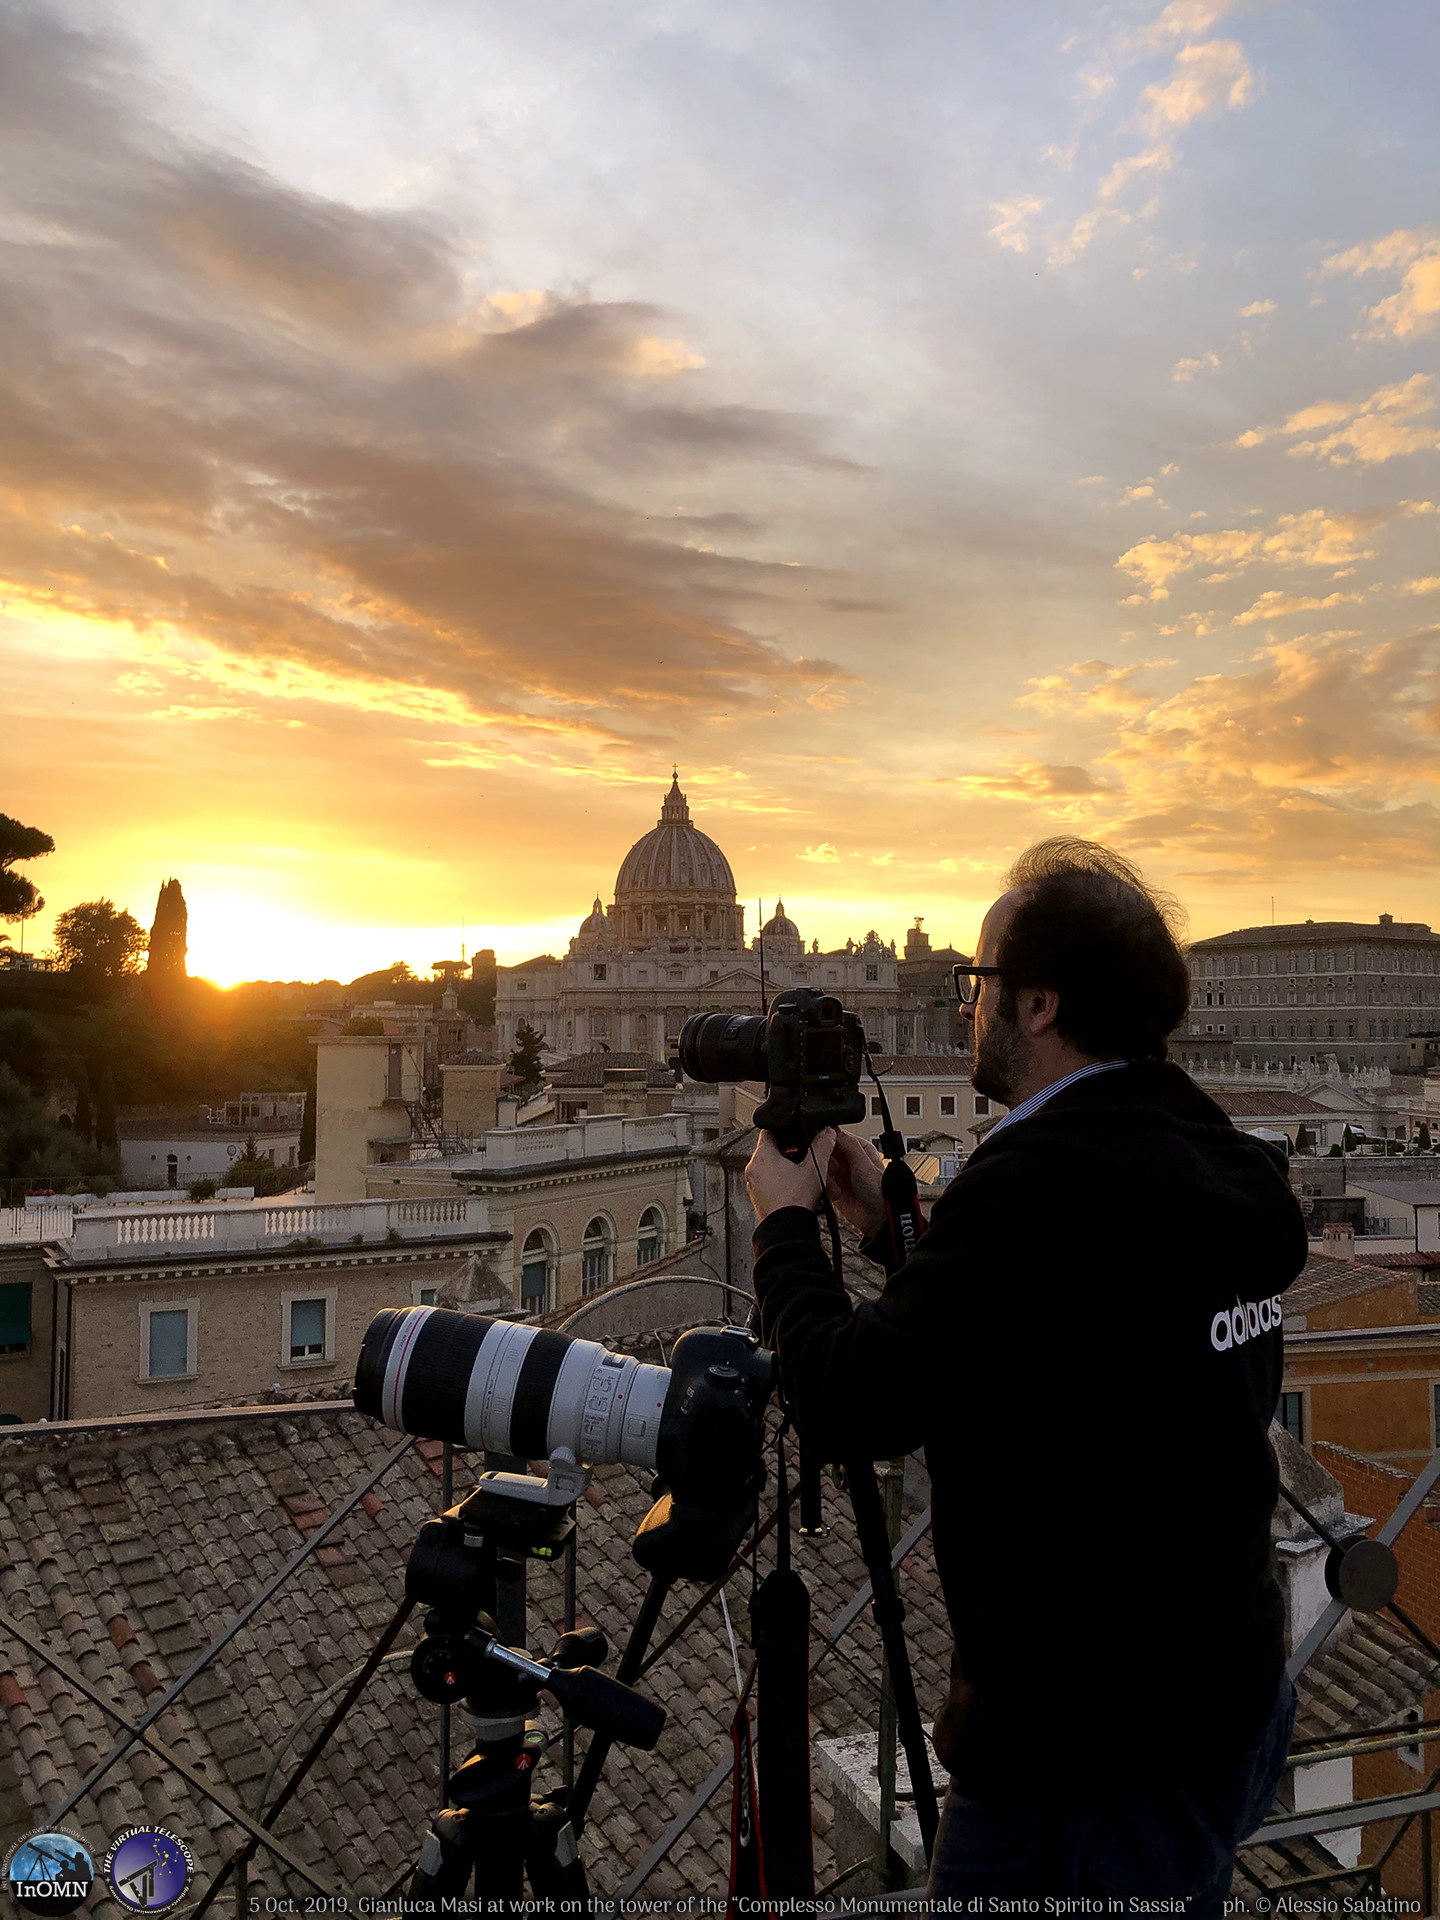 Super sunset while ready to start the live feed. Ph. Alessio Sabatino